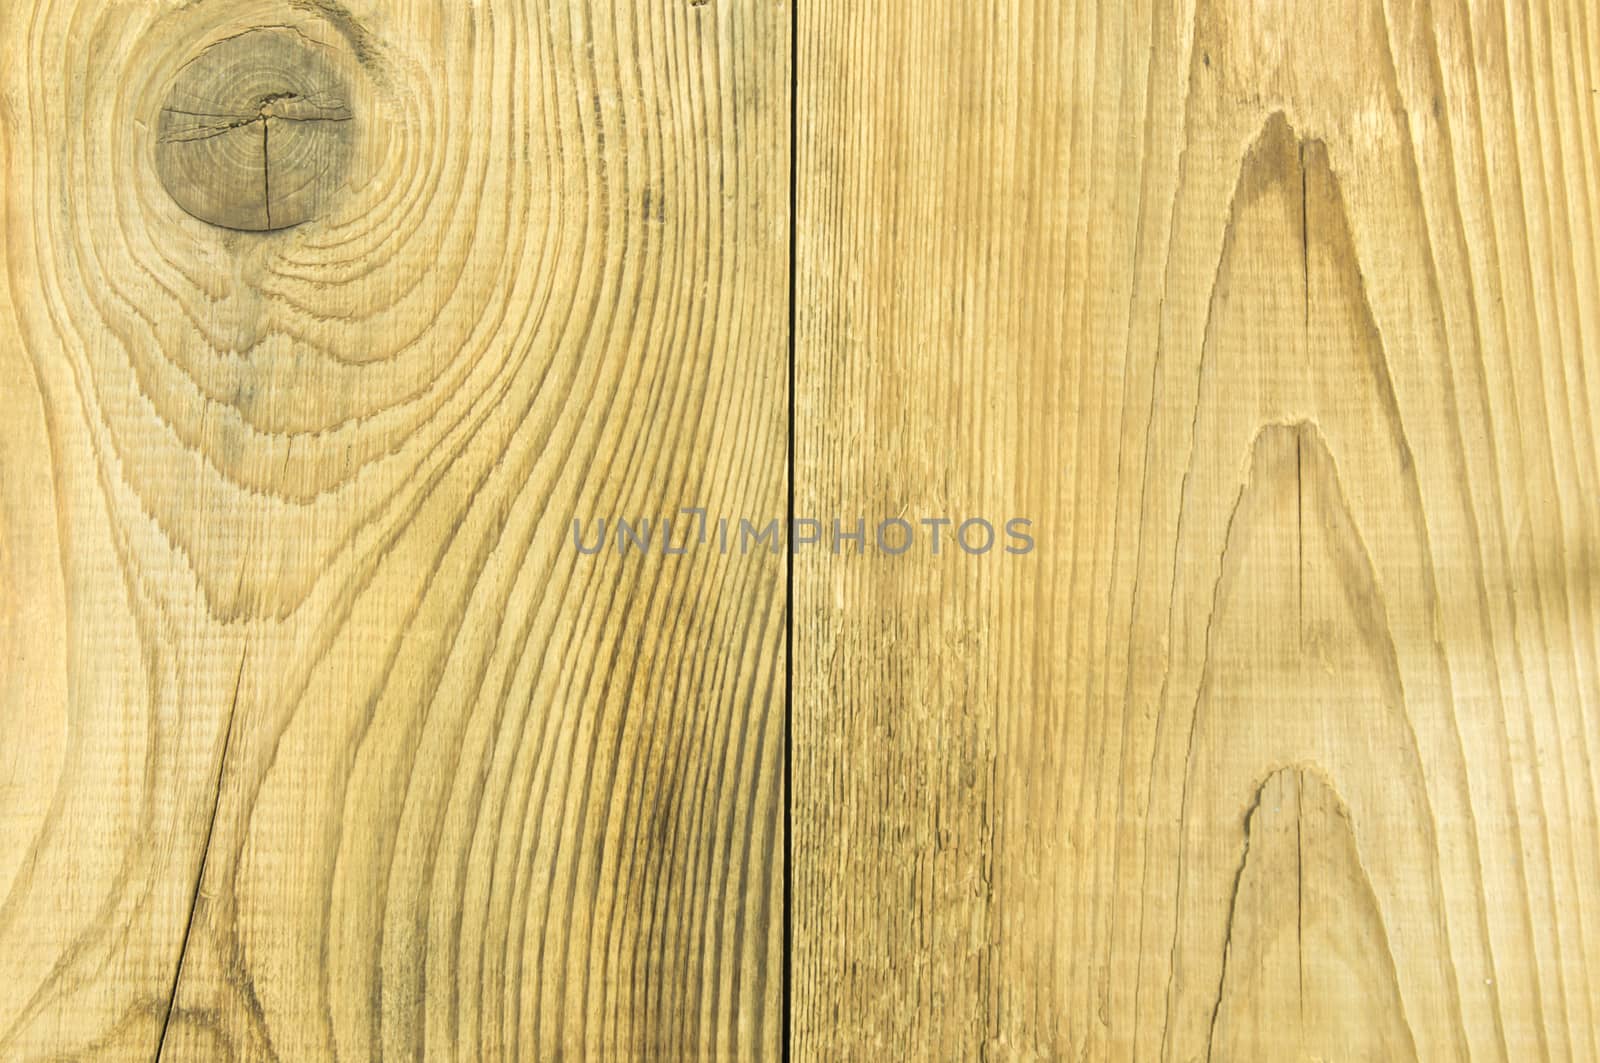 Grunge retro wood background. For your commercial and editorial use